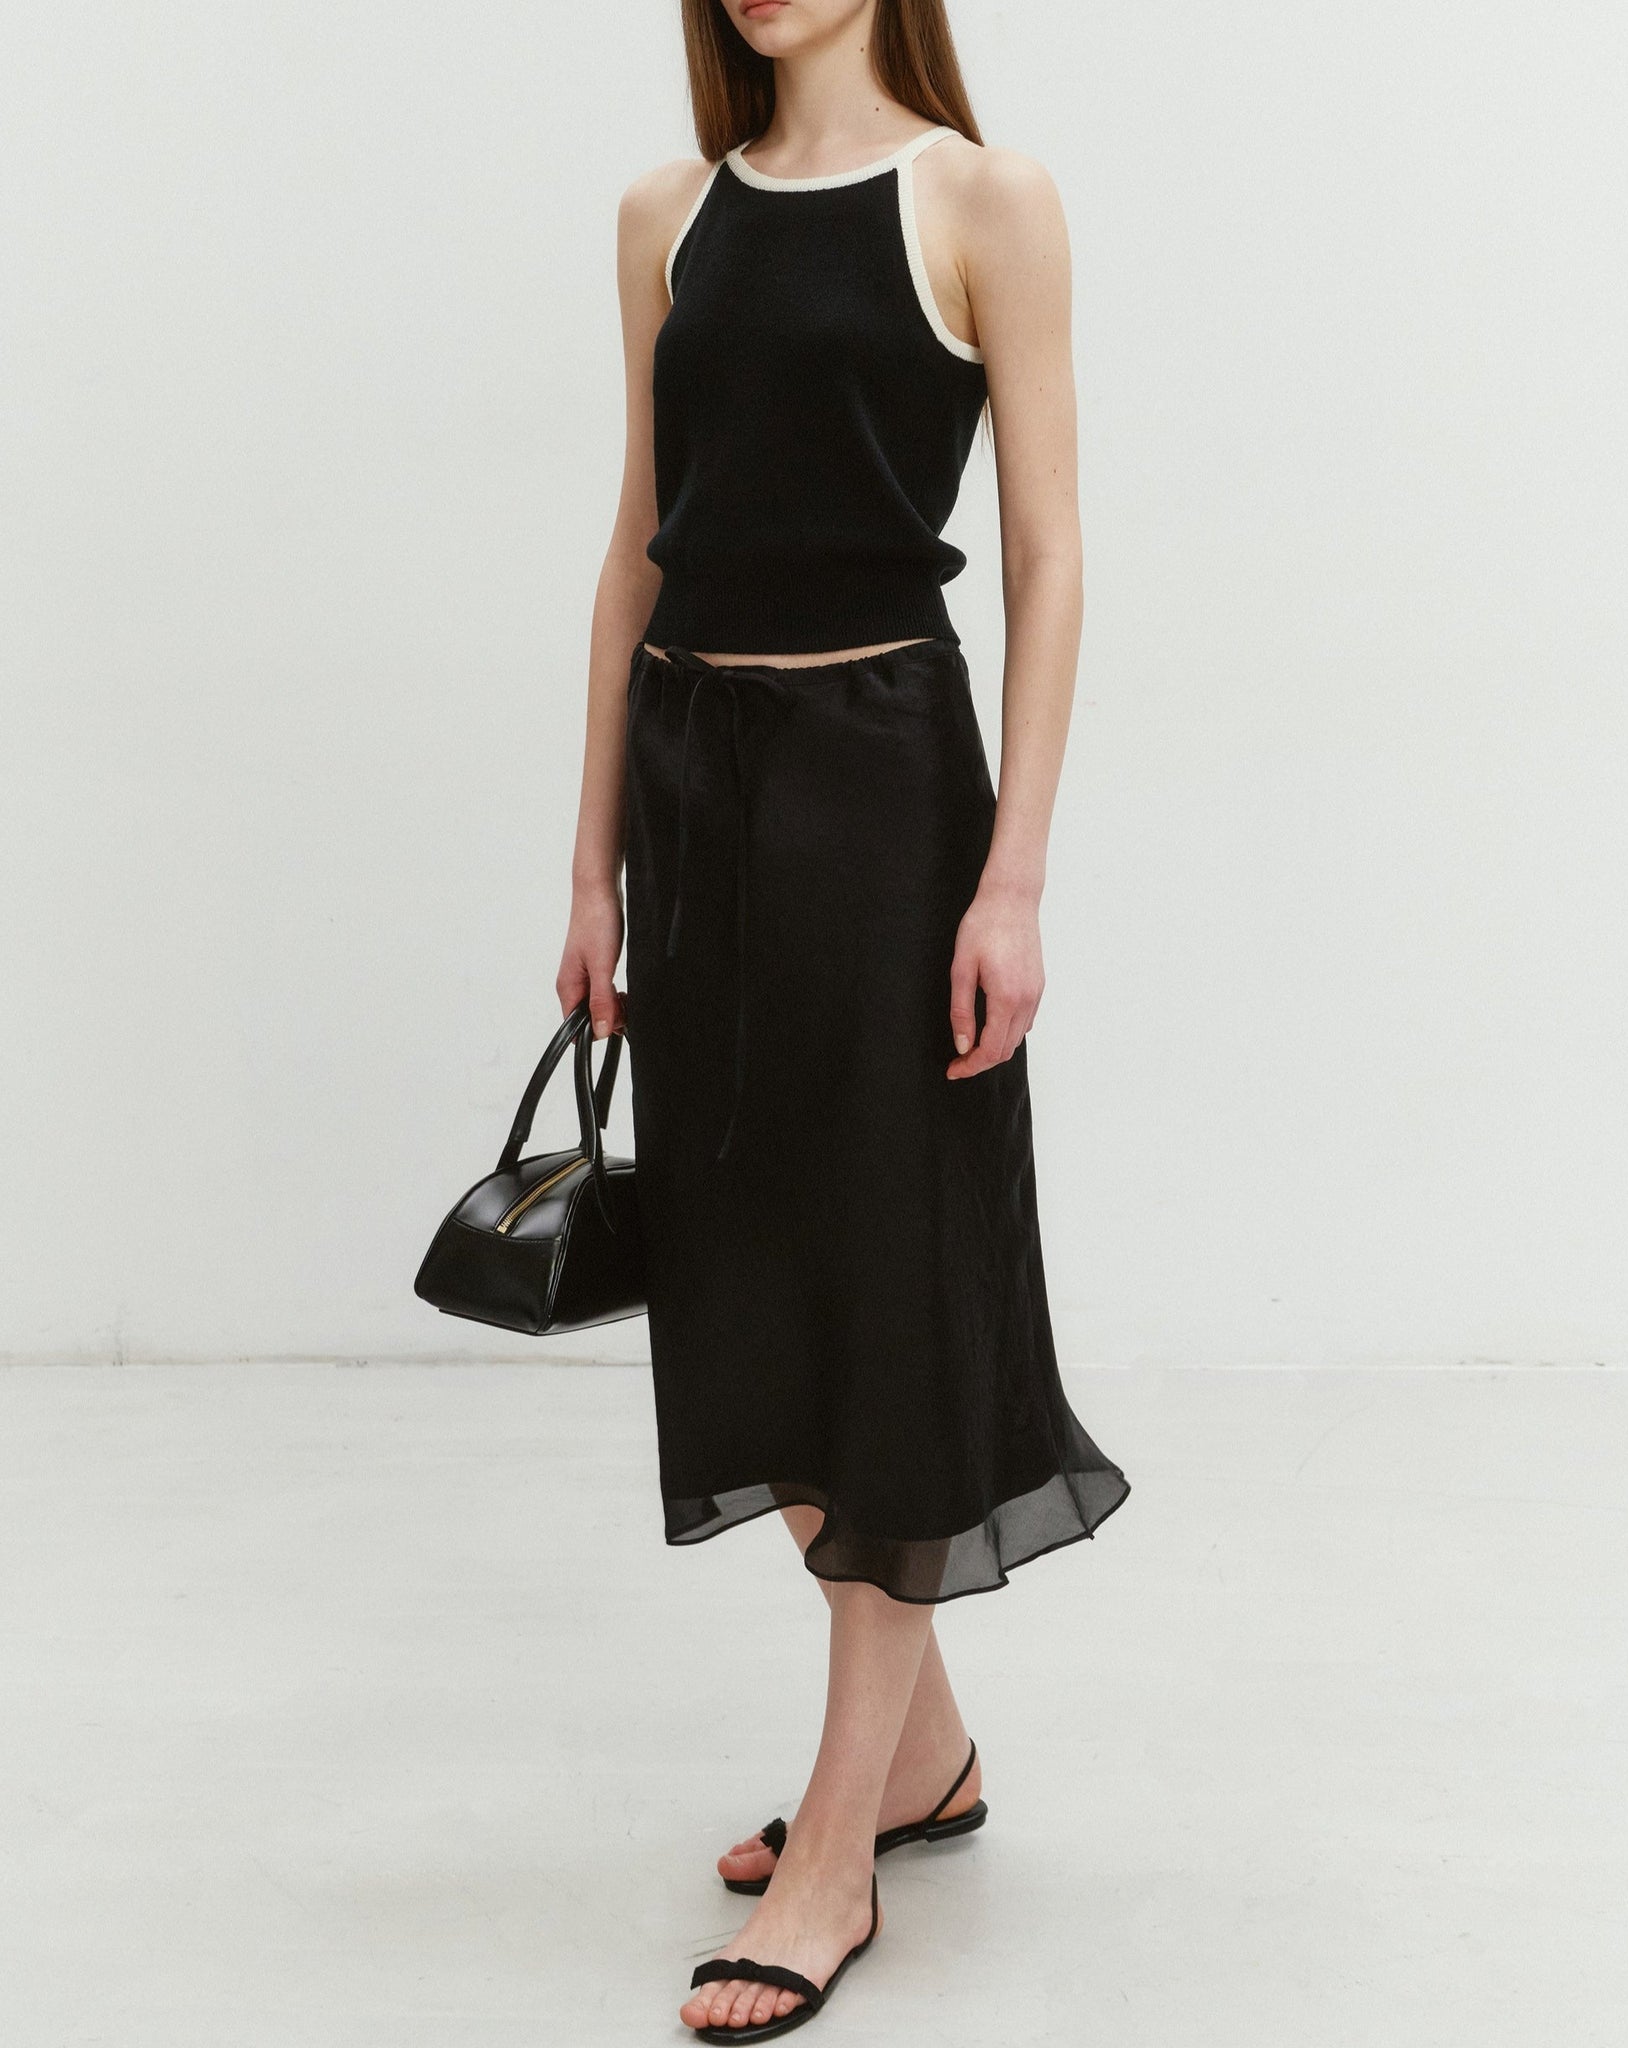 Skirt by Dunst